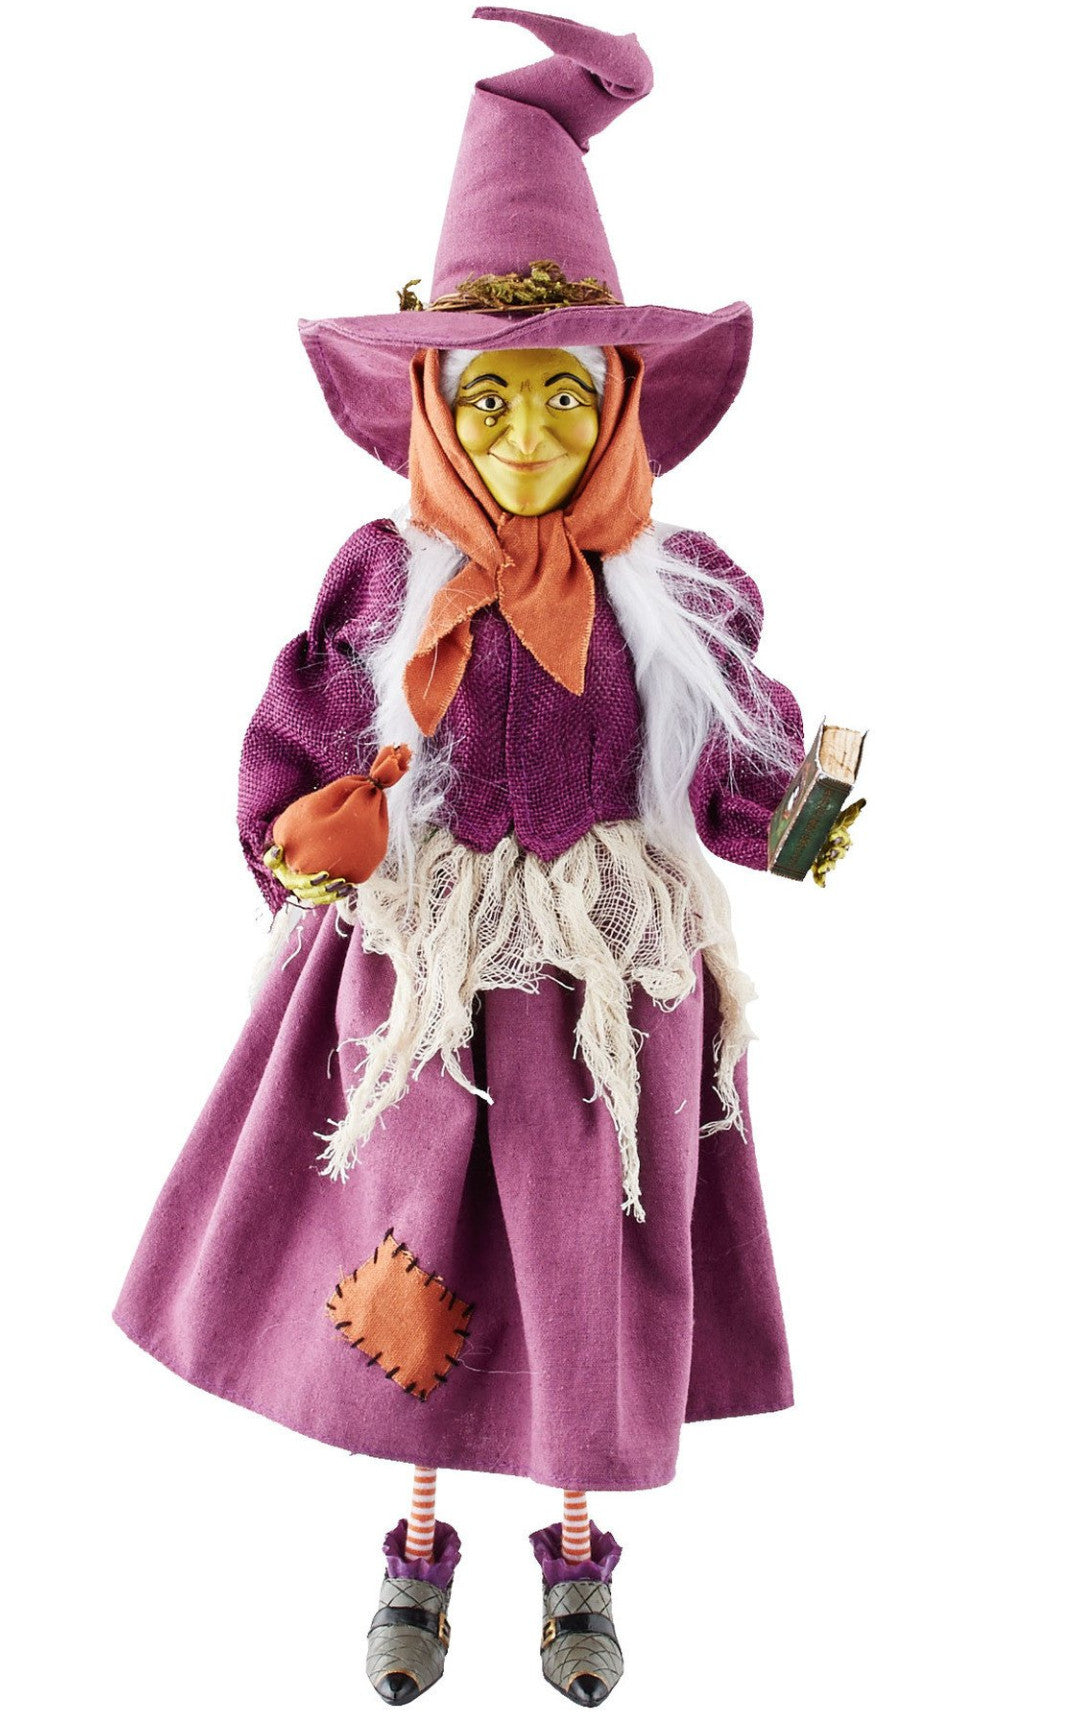 Lucy the Cat Witch Figurine in purple dress